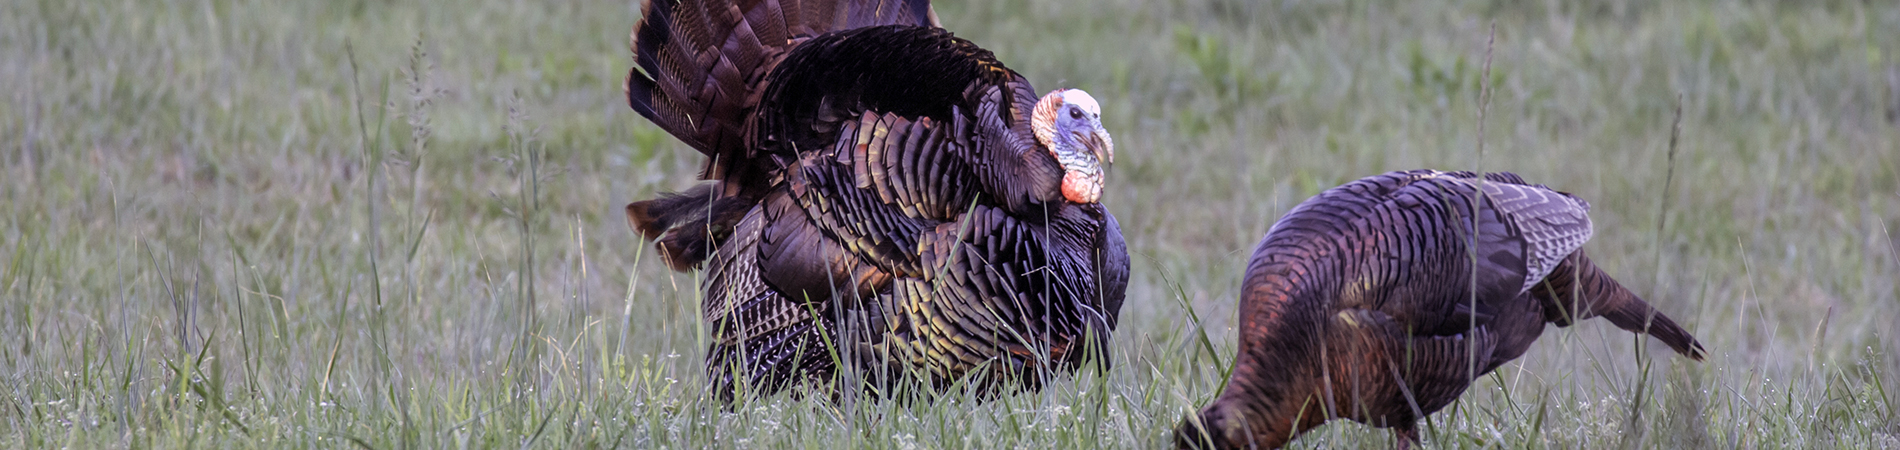 2019 Statewide Turkey Hunting Season Opens March 23…in Georgia